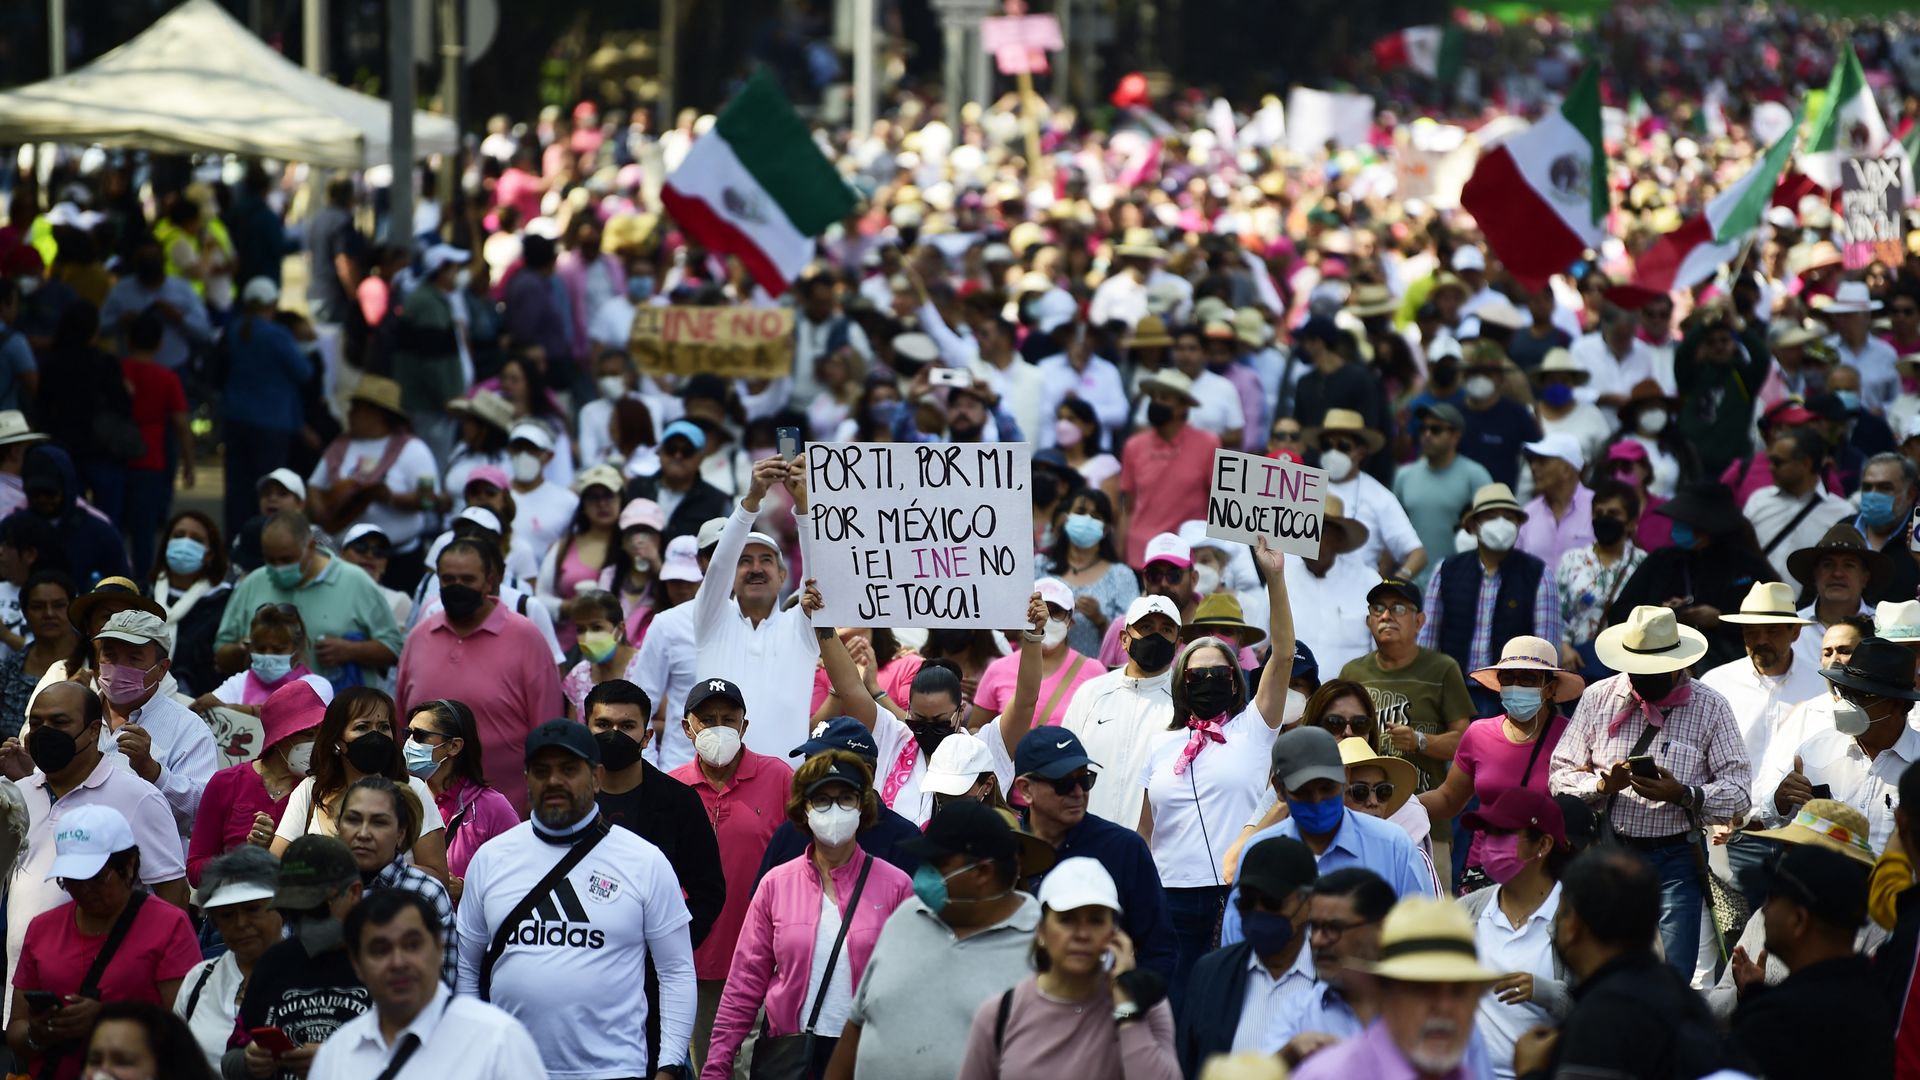 Protesters march through Mexico City against proposed reforms to the nation's electoral system